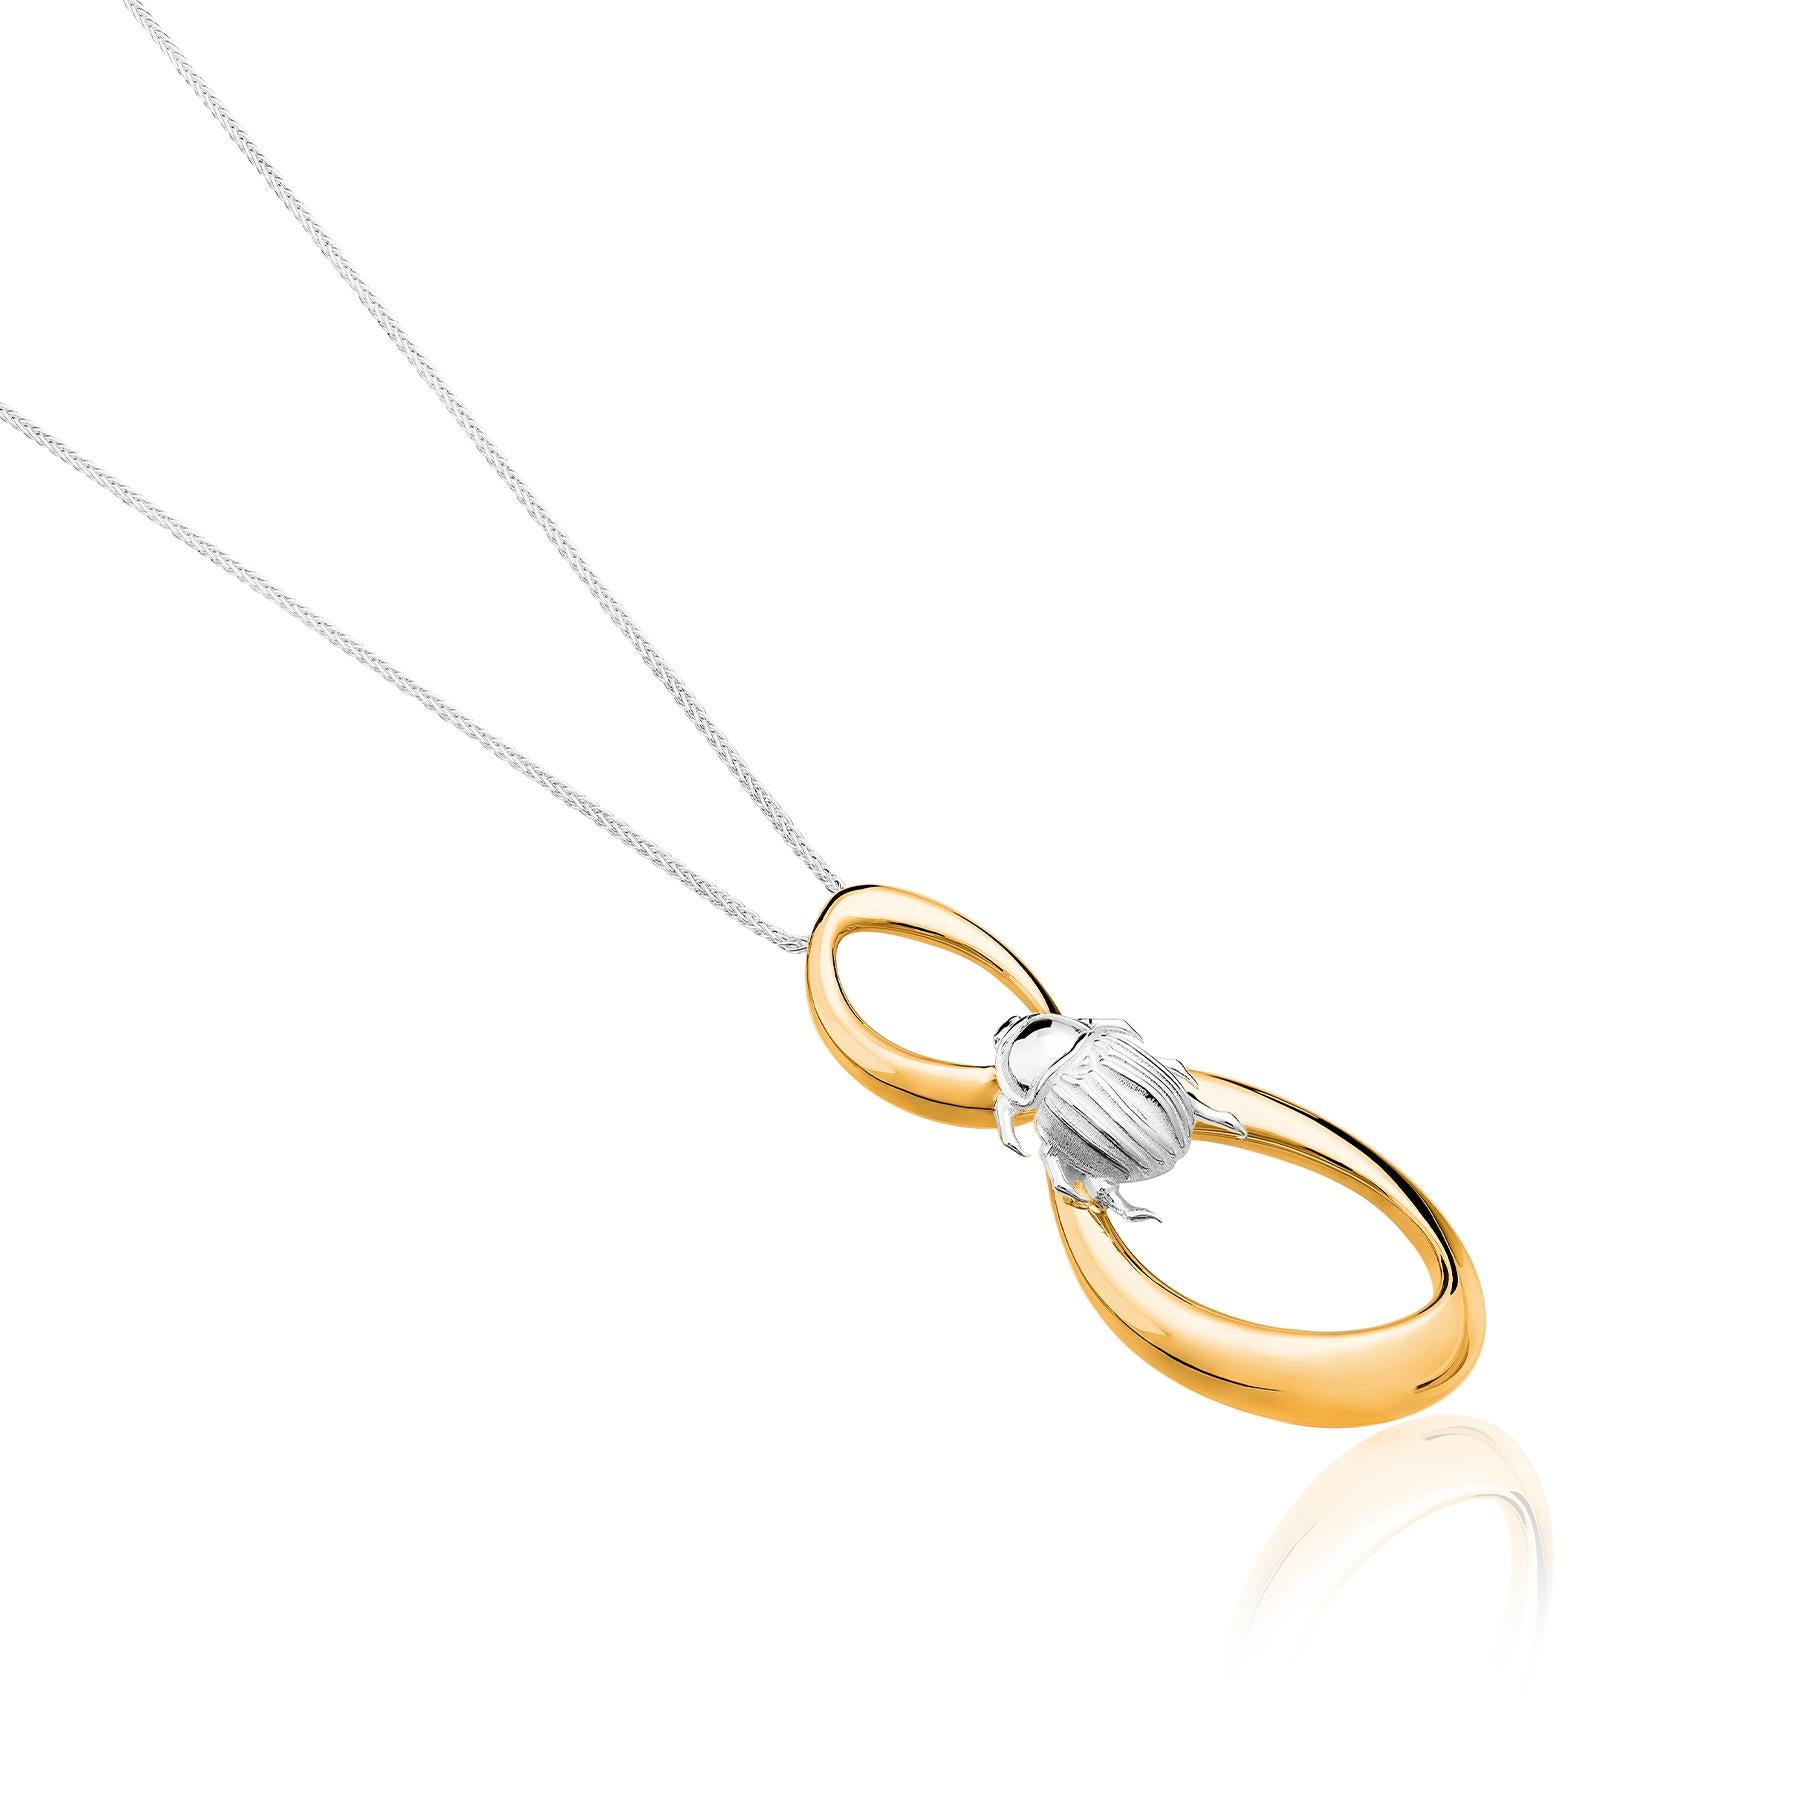 The Beetle Vermeil Pendant from the Animales Collection by TANE is made in sterling silver. Suspended from a chain of 31.4”, there are a pair of irregular links designed for the collection, inspired by nature, finished in yellow gold vermeil. These